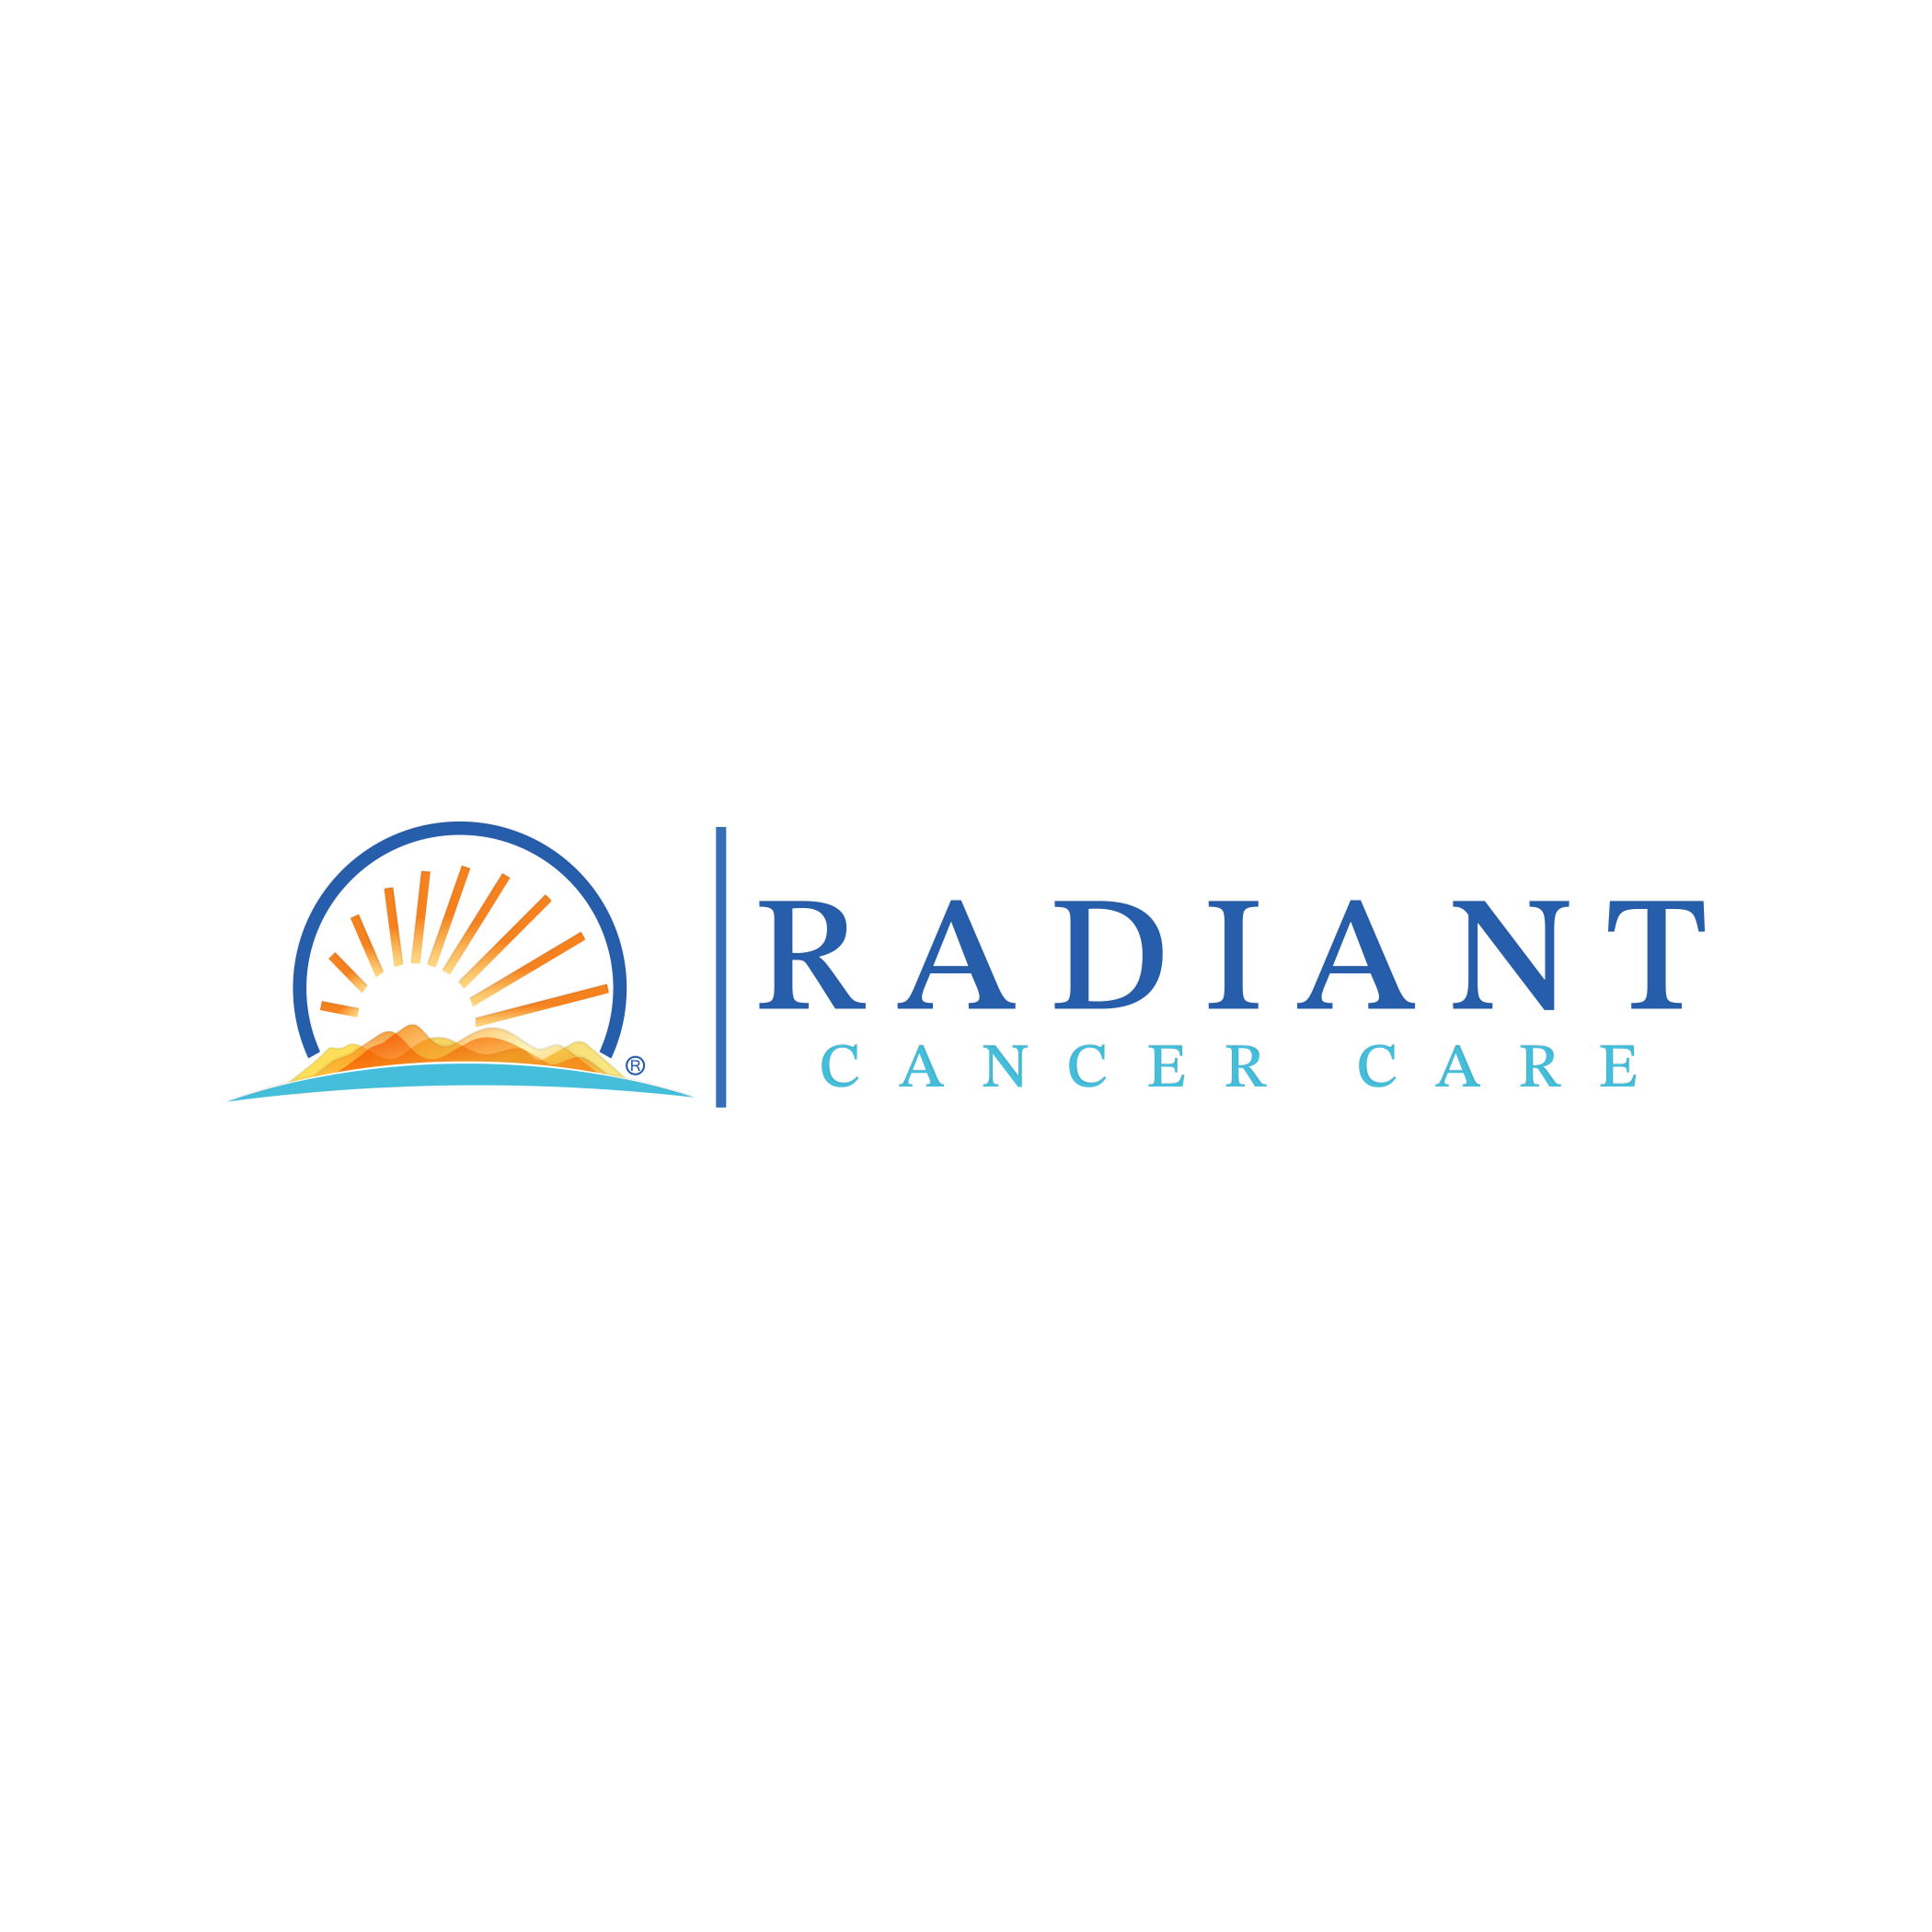 Radiant Cancer Care – Radiation Oncology for Palm Desert, Rancho Mirage, Coachella Valley